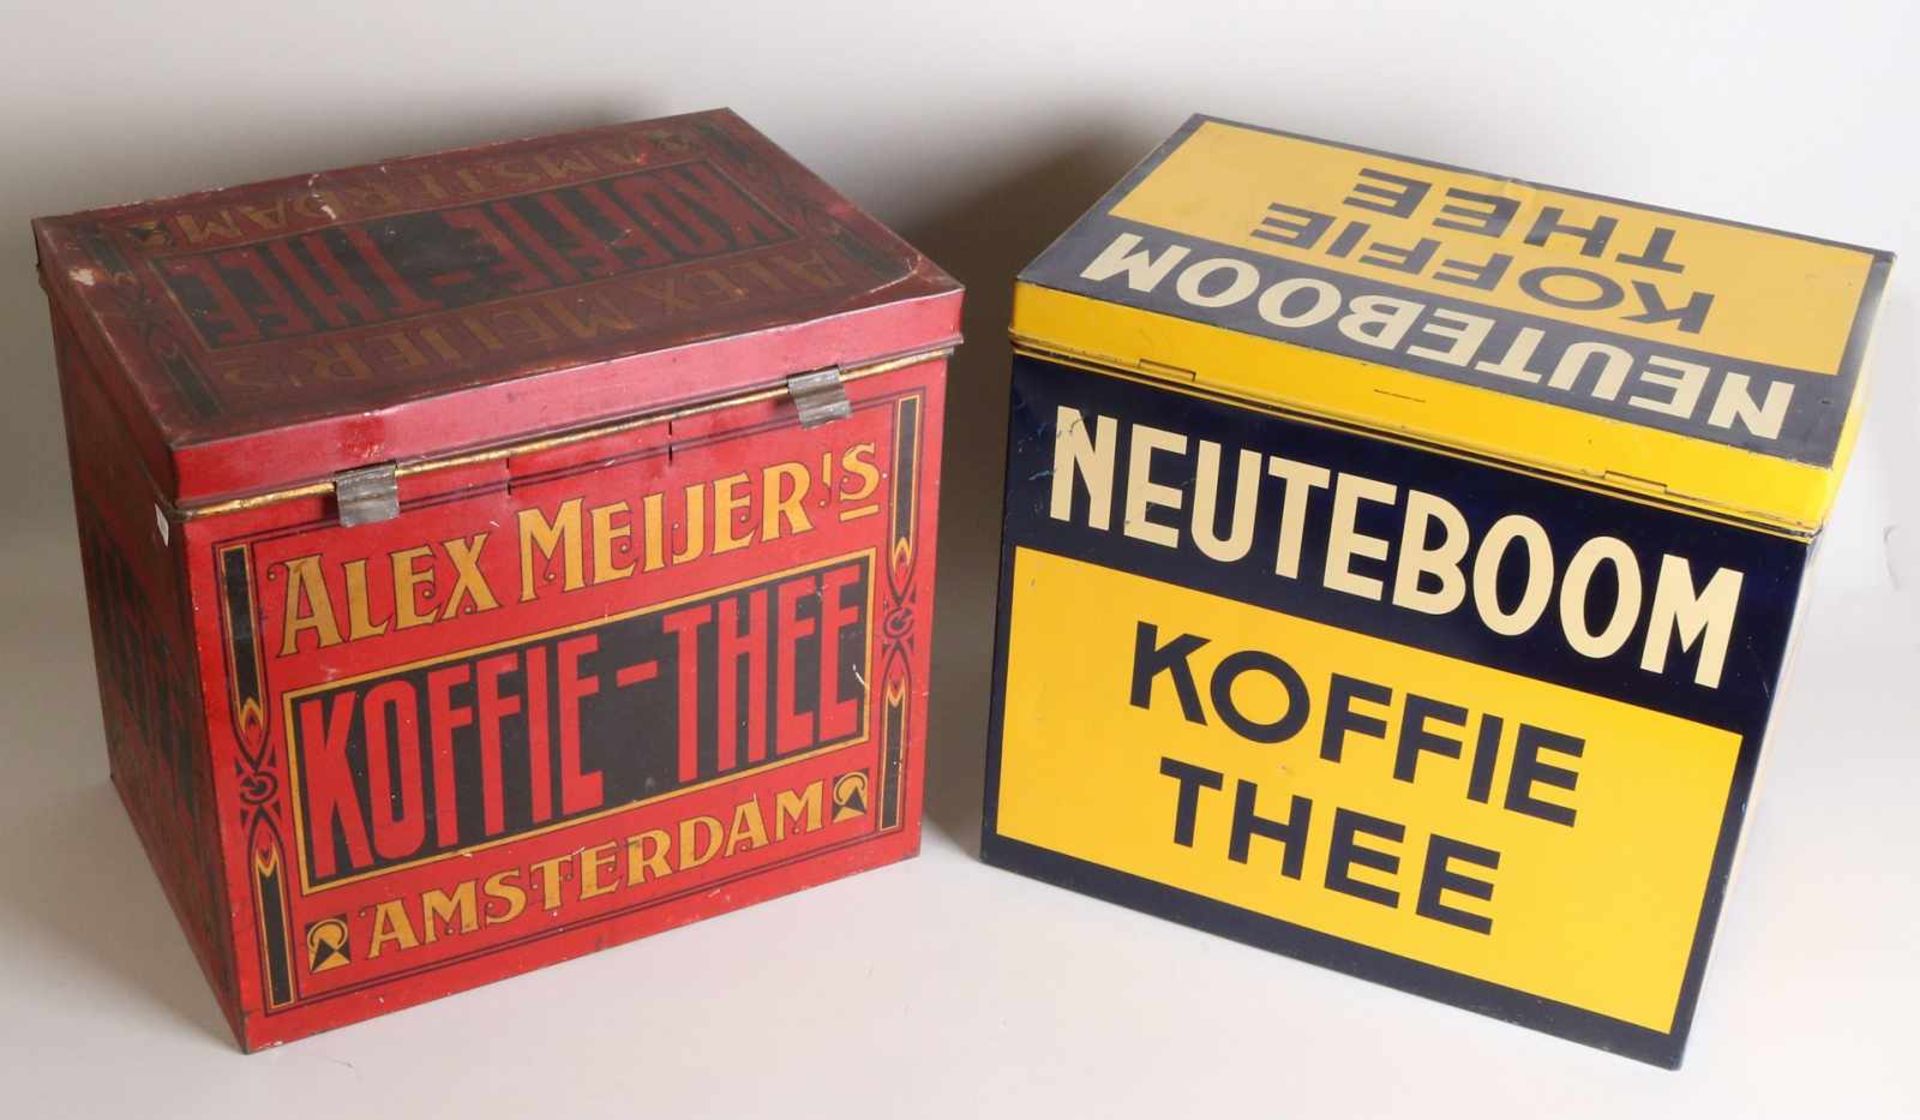 Two large antique grocery stock cans. Consisting of: Neuteboom Coffee-Tea, 1930. Alex Meijer's - Image 2 of 2